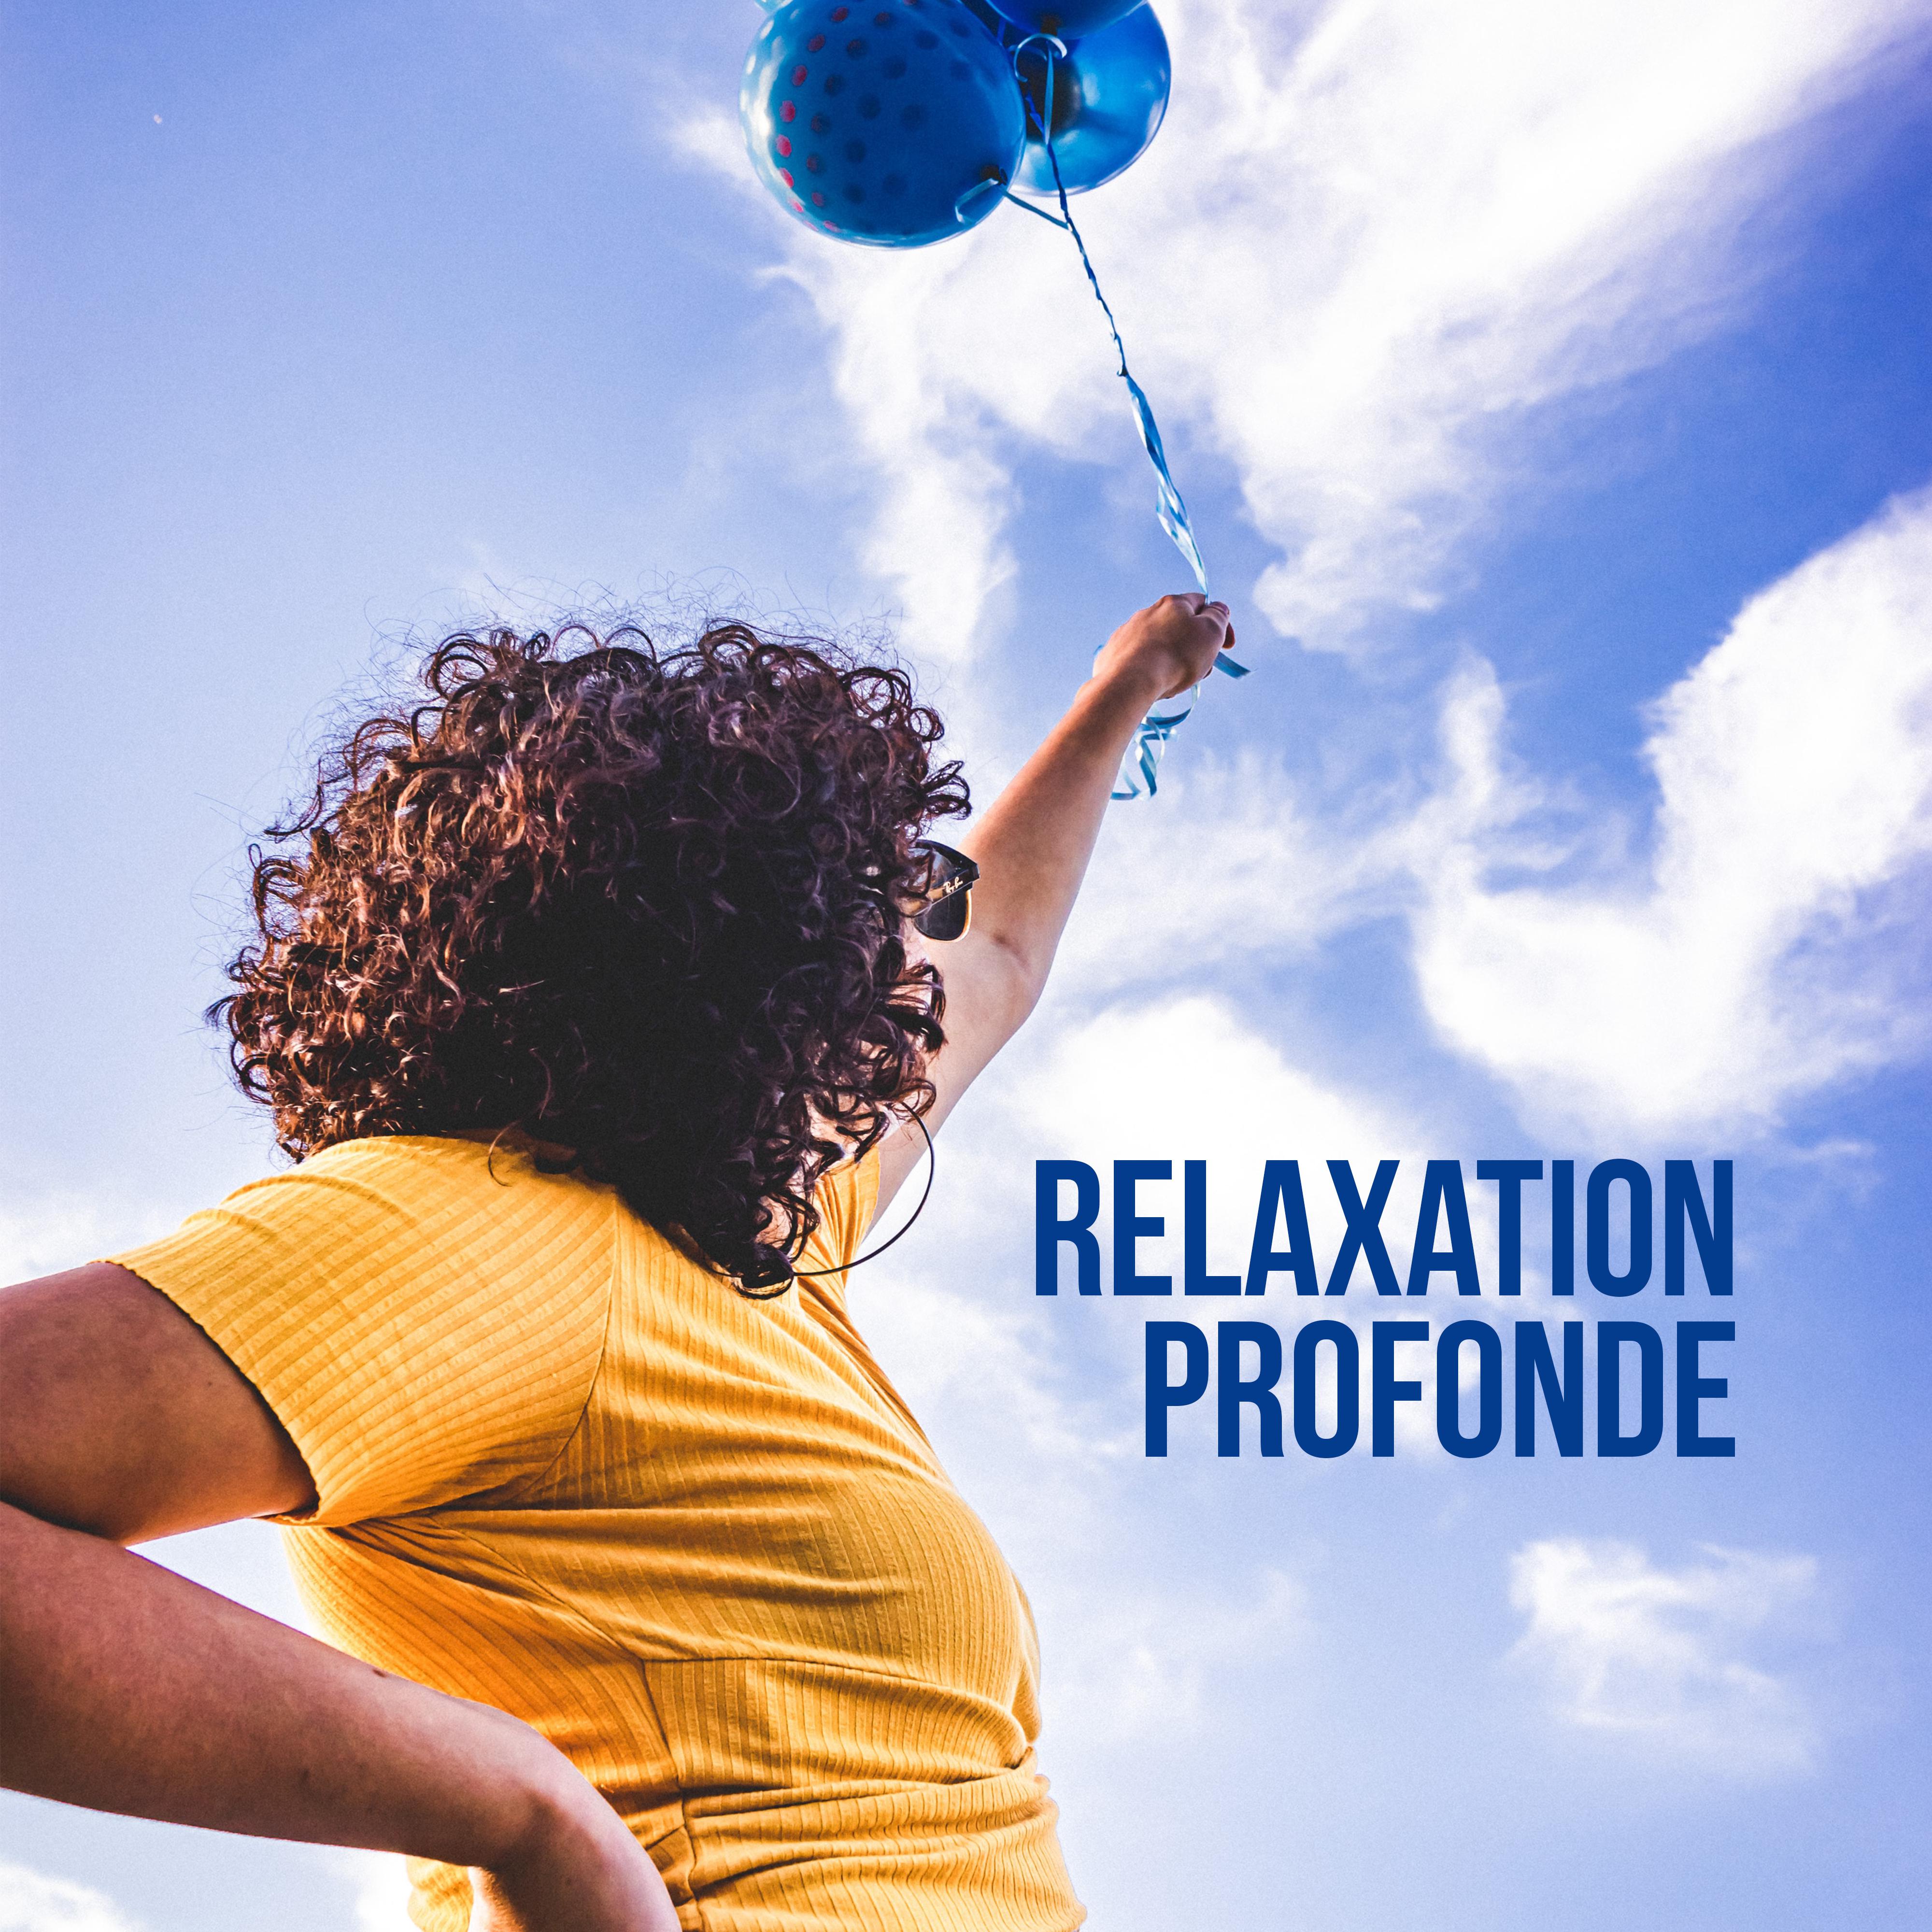 Relaxation profonde: Chill Out 2019